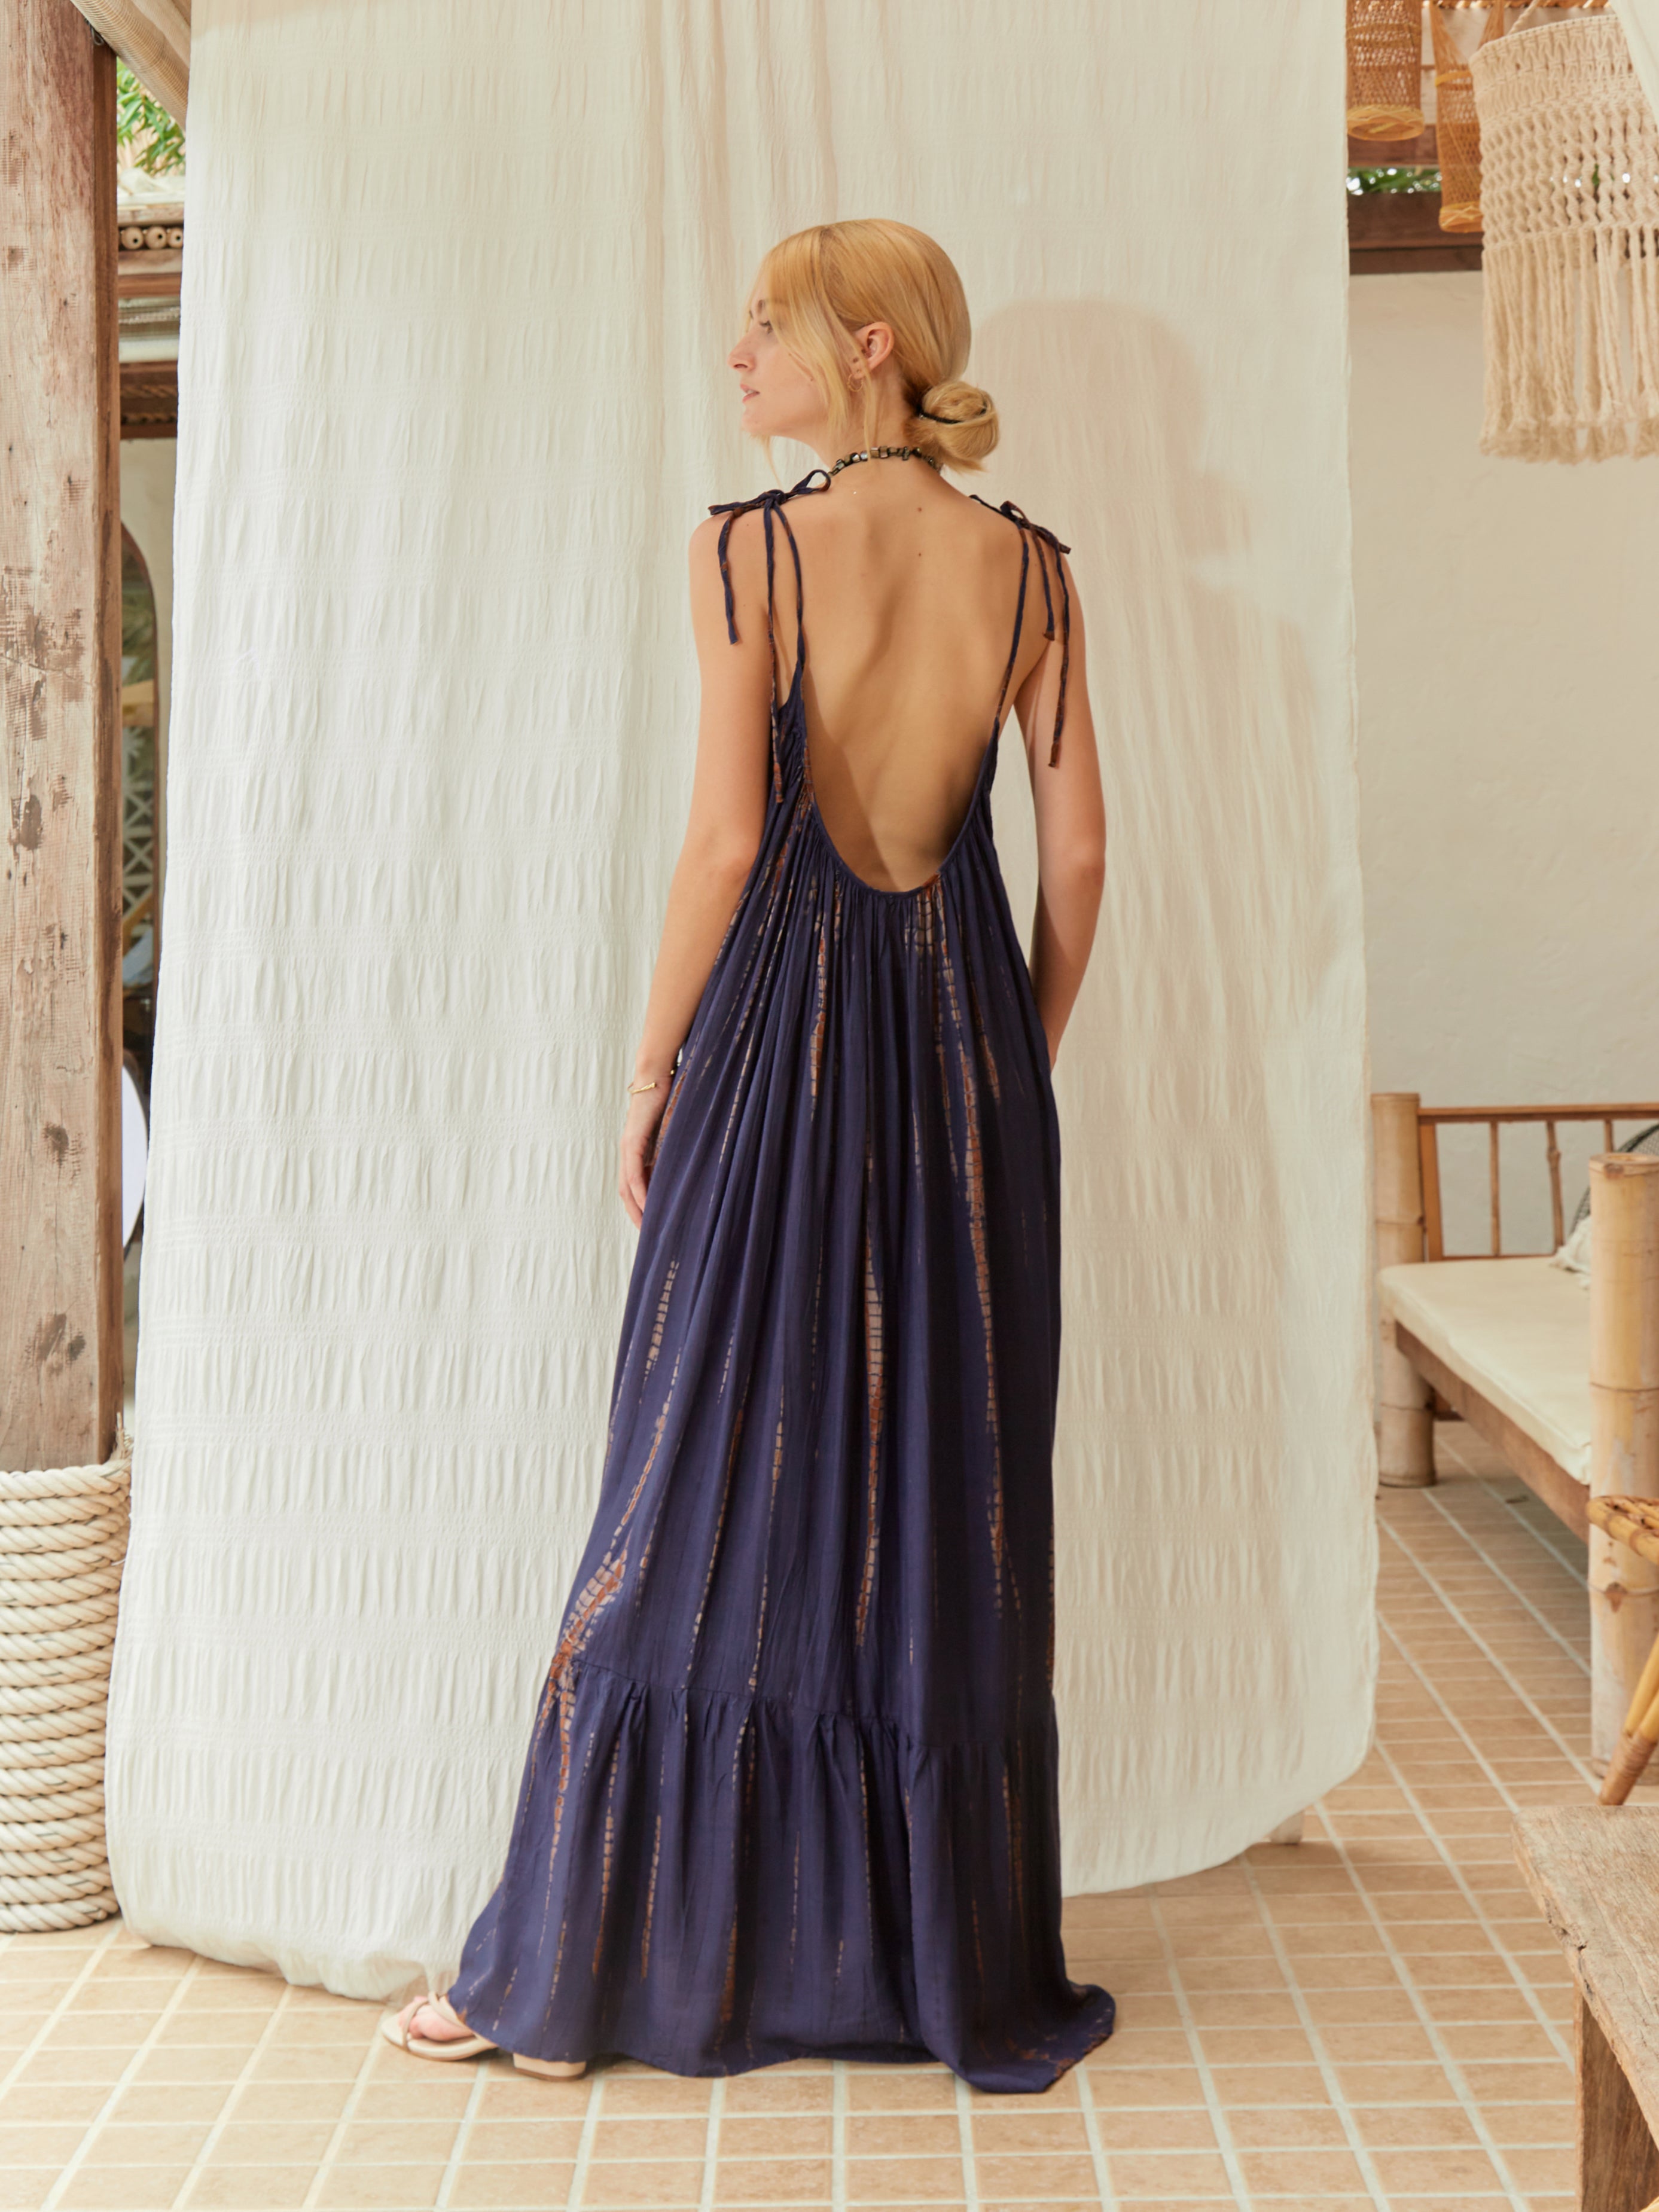 Unleash your inner fashionista with our Navy Backless Maxi Dress from Mali - Shop now and stun the crowd!